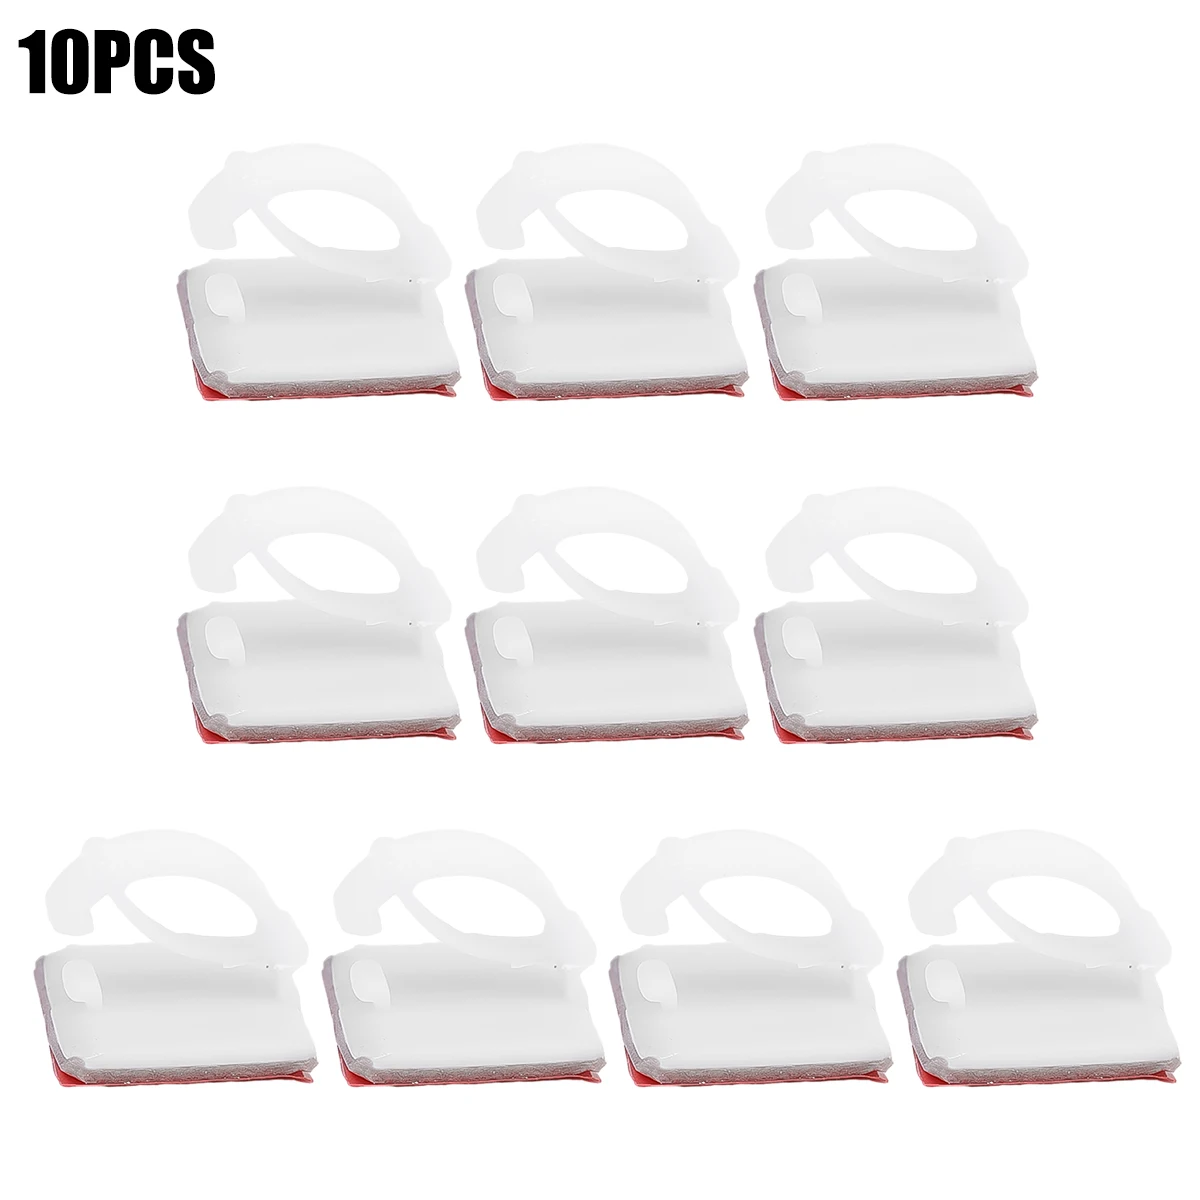 10pcs Car Fixed Clip Self-adhesive Cable Clips For Car Dash Camera Wire Fixing Organizer Dashboard Wire Cable Clamp Clips